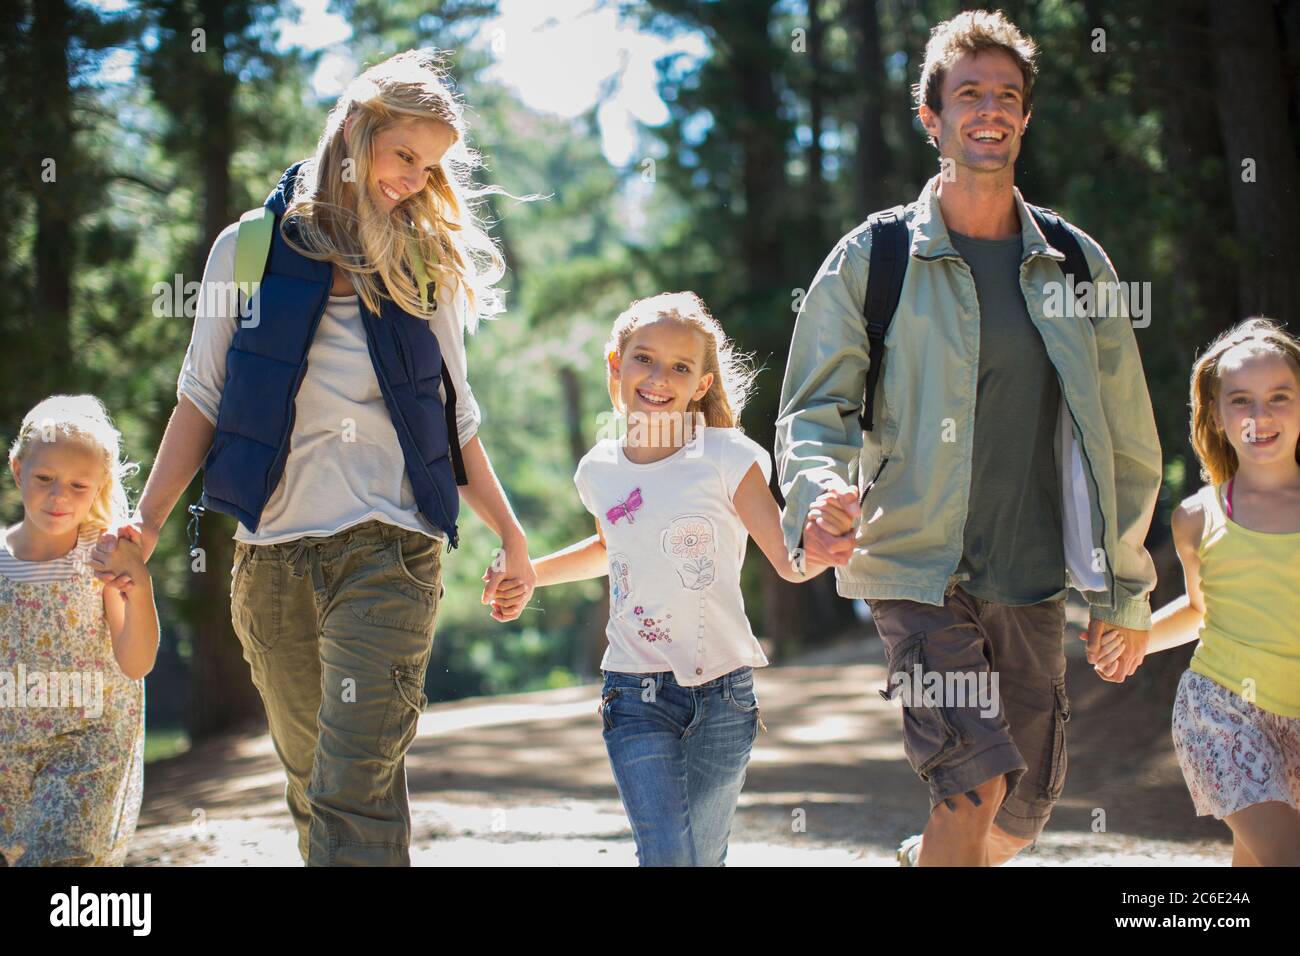 Smiling family holding hands and walking in woods Stock Photo